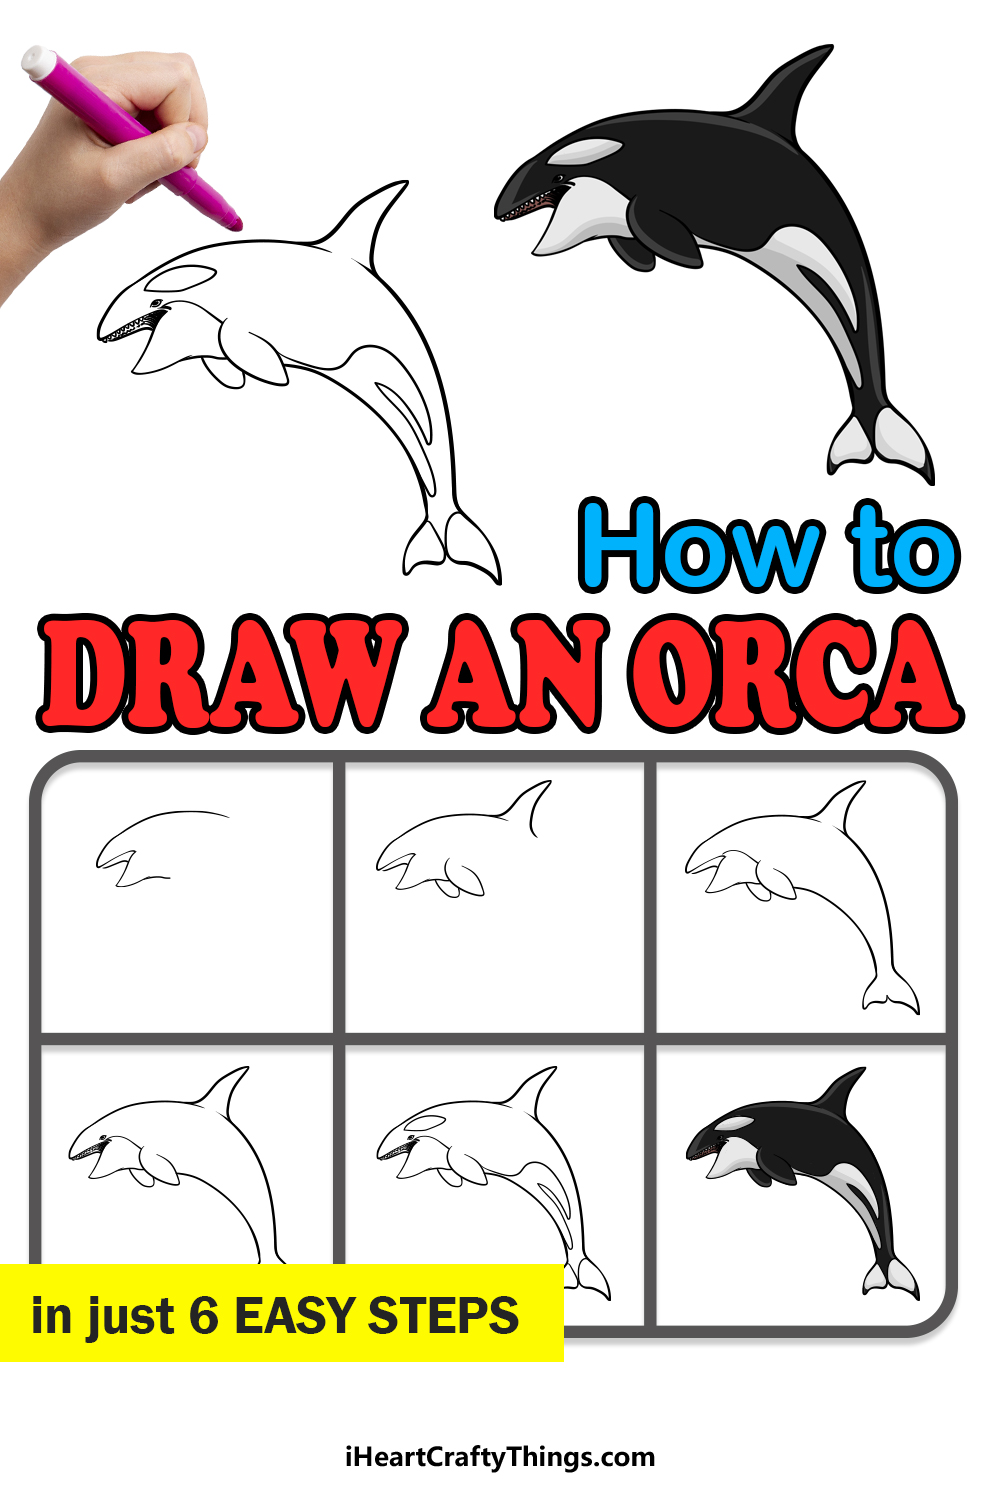 how to draw an orca in 6 easy steps